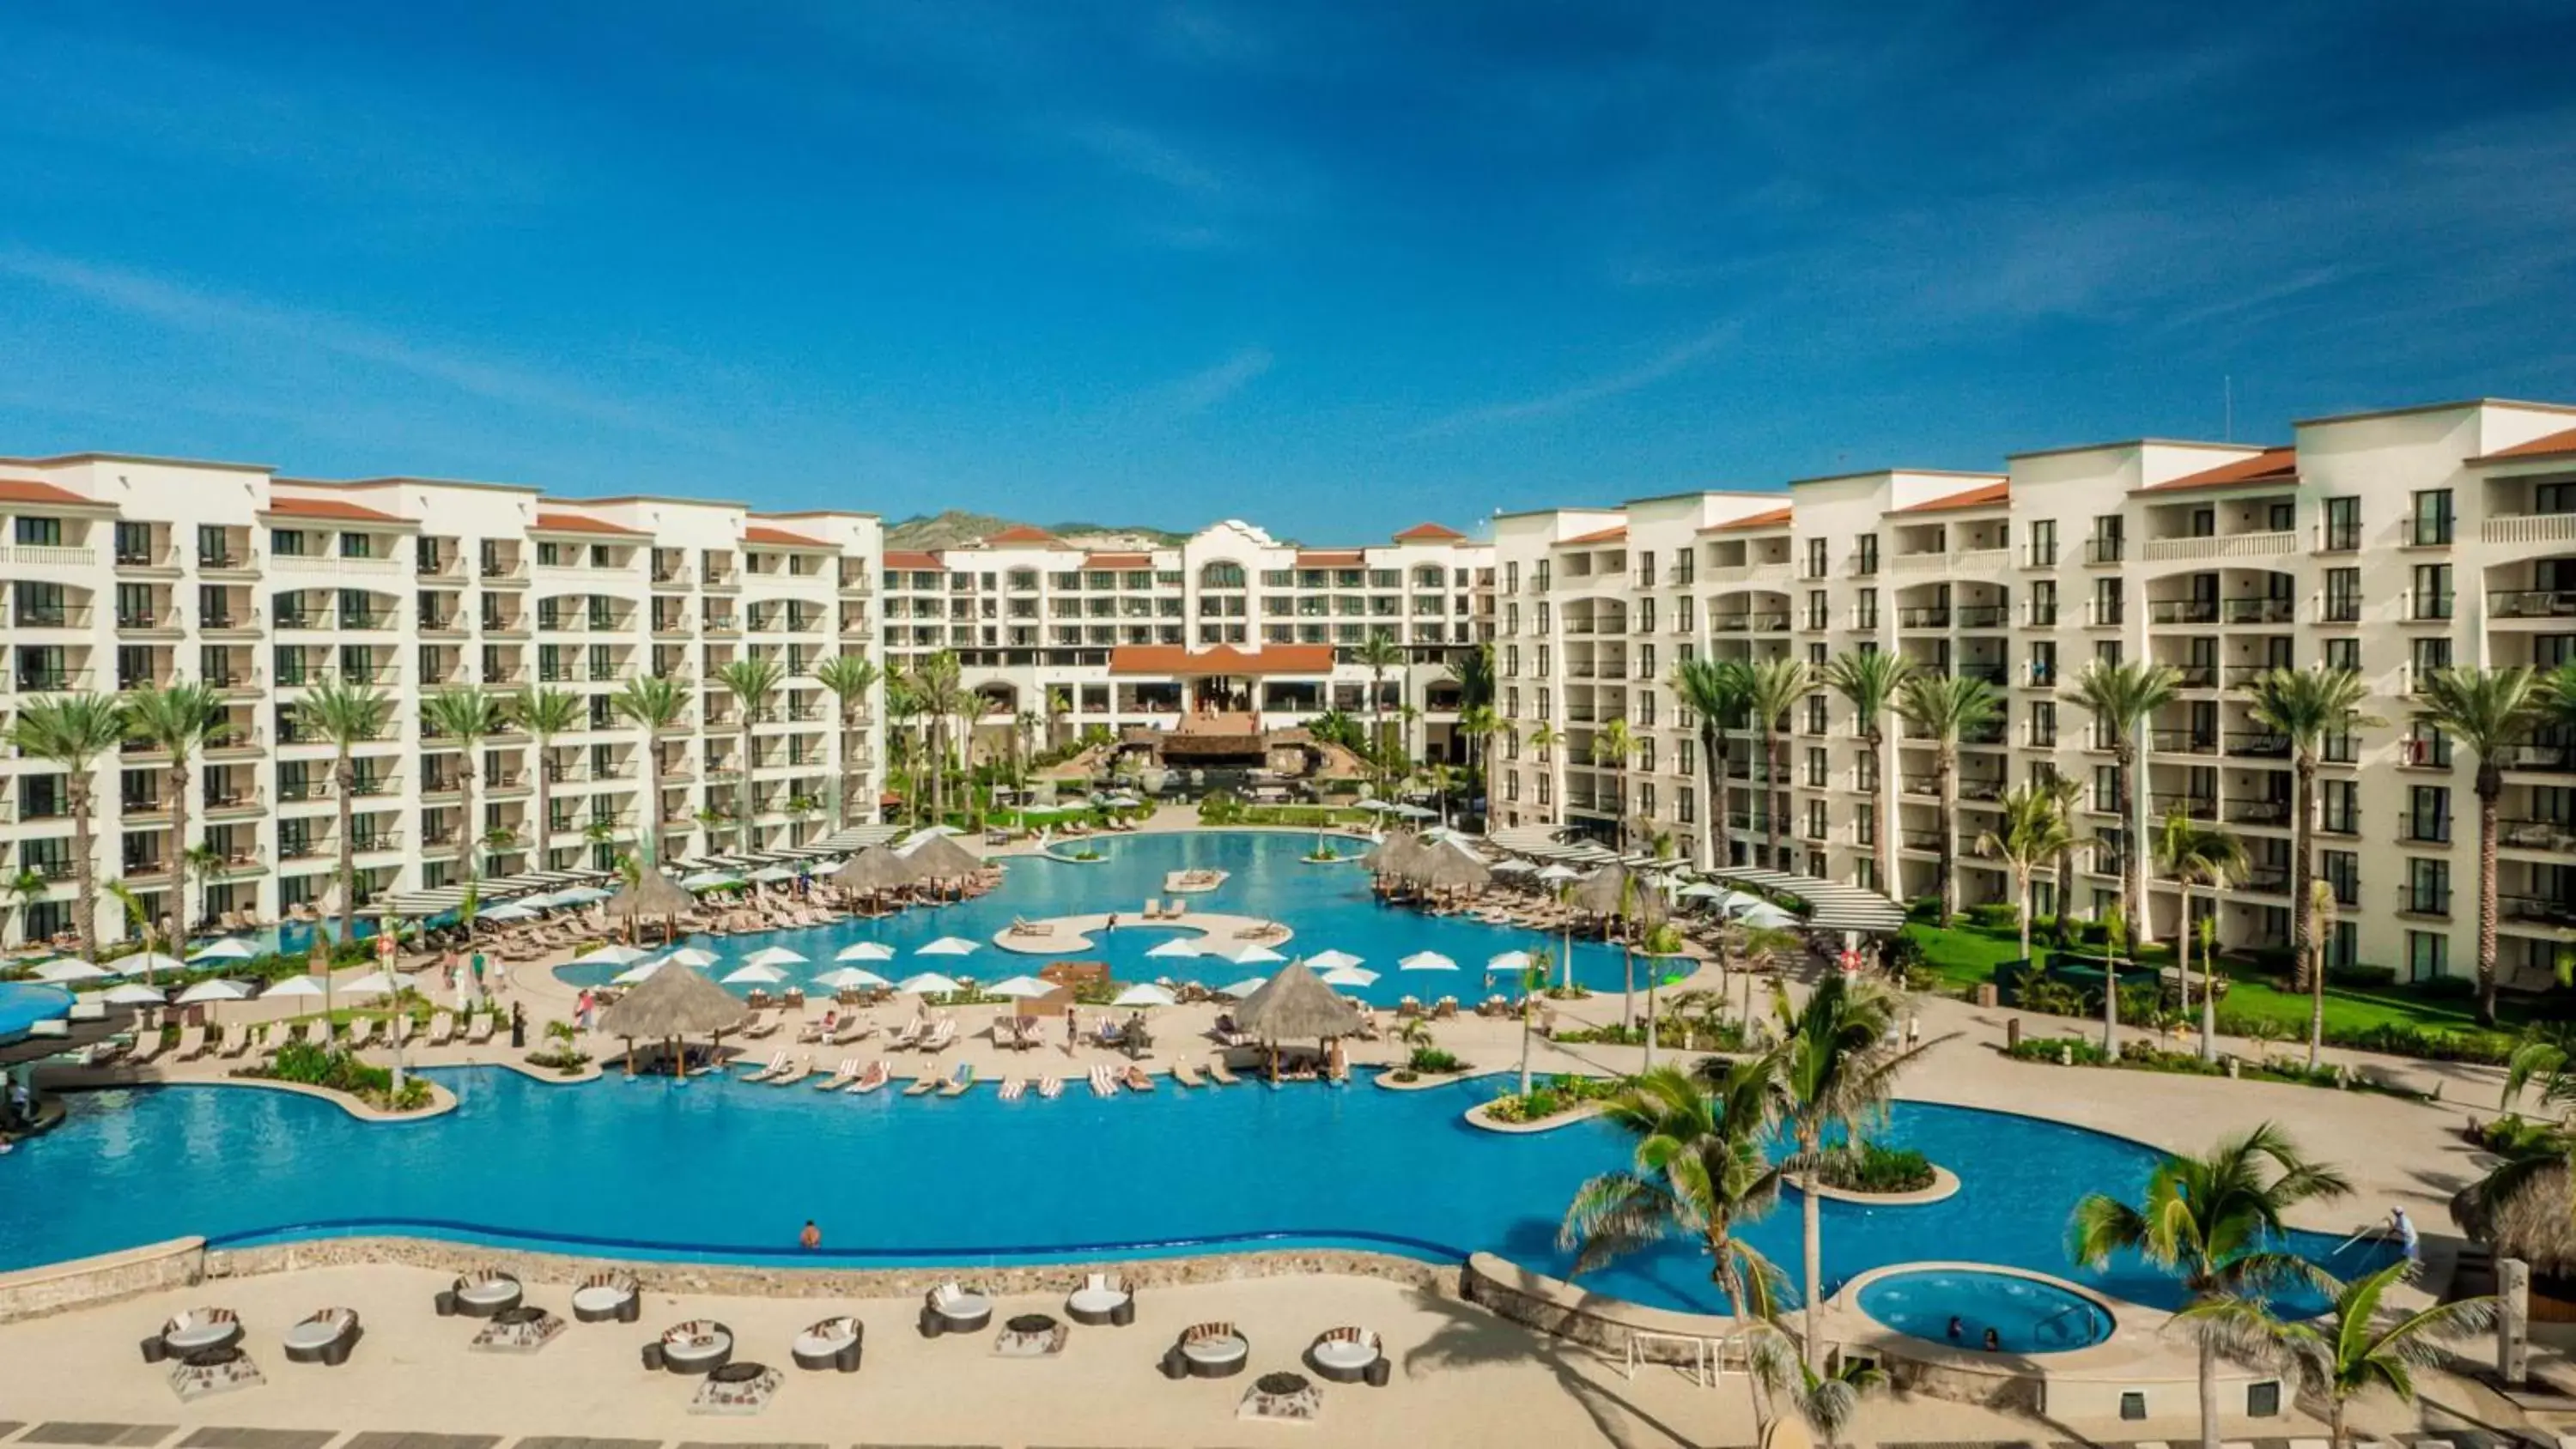 Property building, Pool View in Hyatt Ziva Los Cabos - All Inclusive